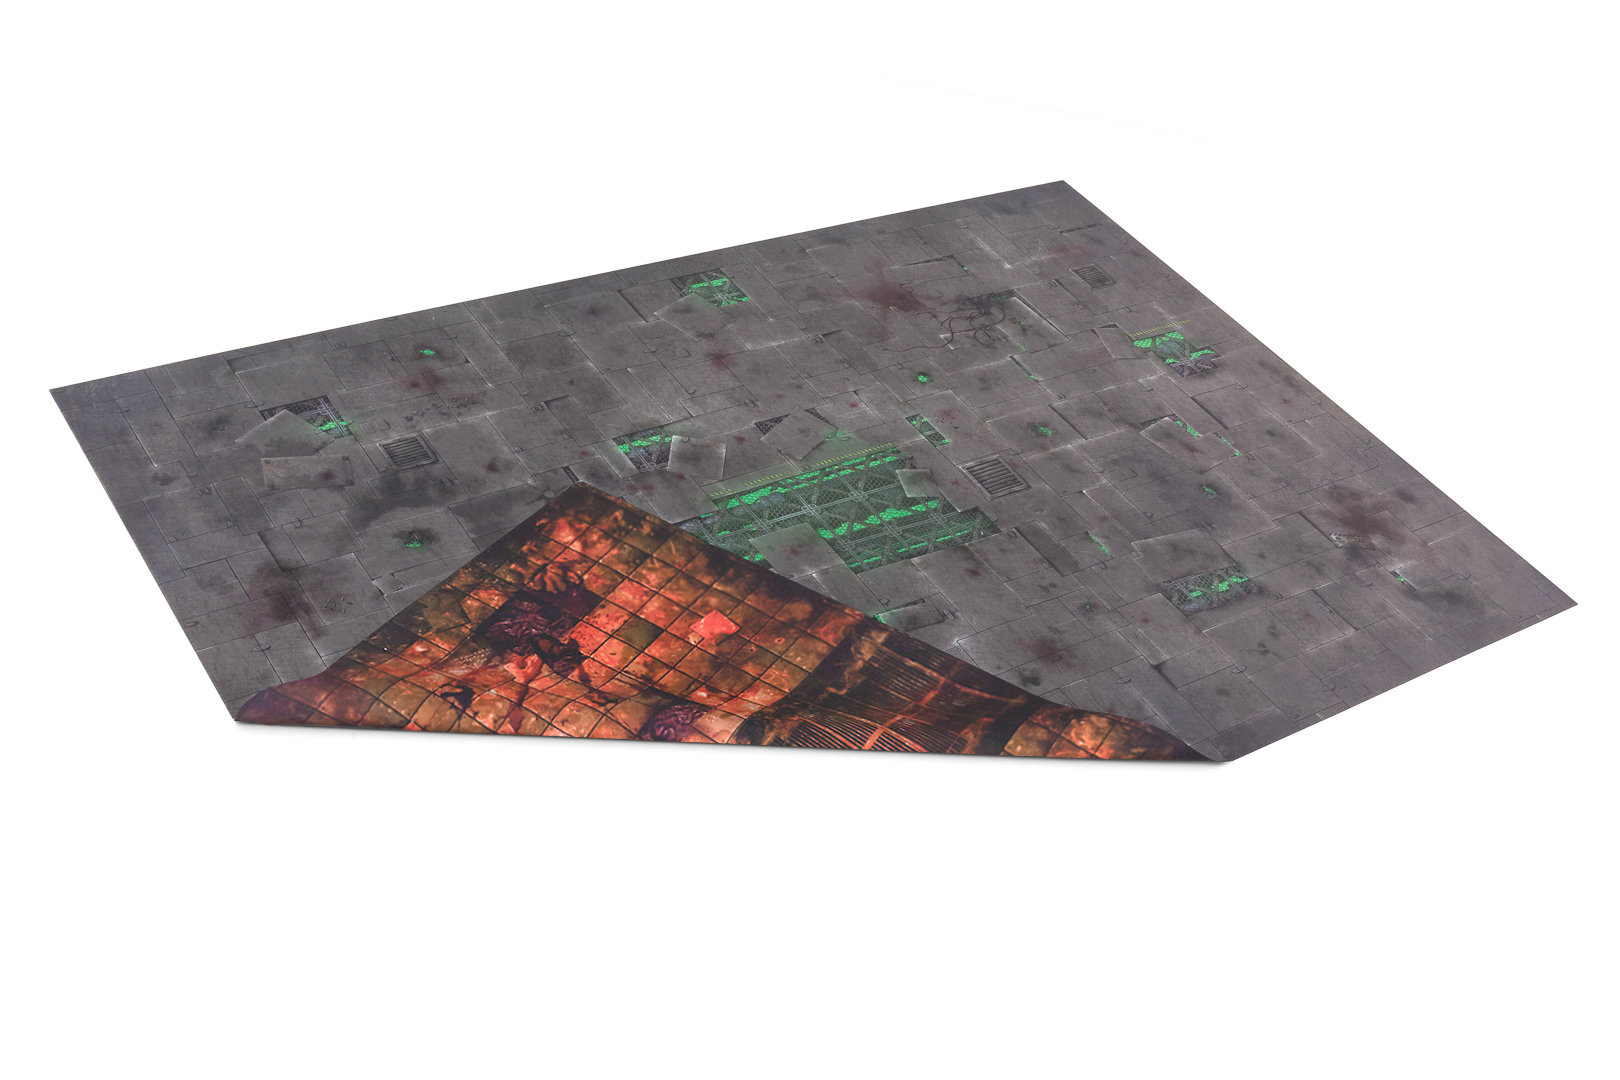 New double-sided mats in stock! GAMEMAT.EU